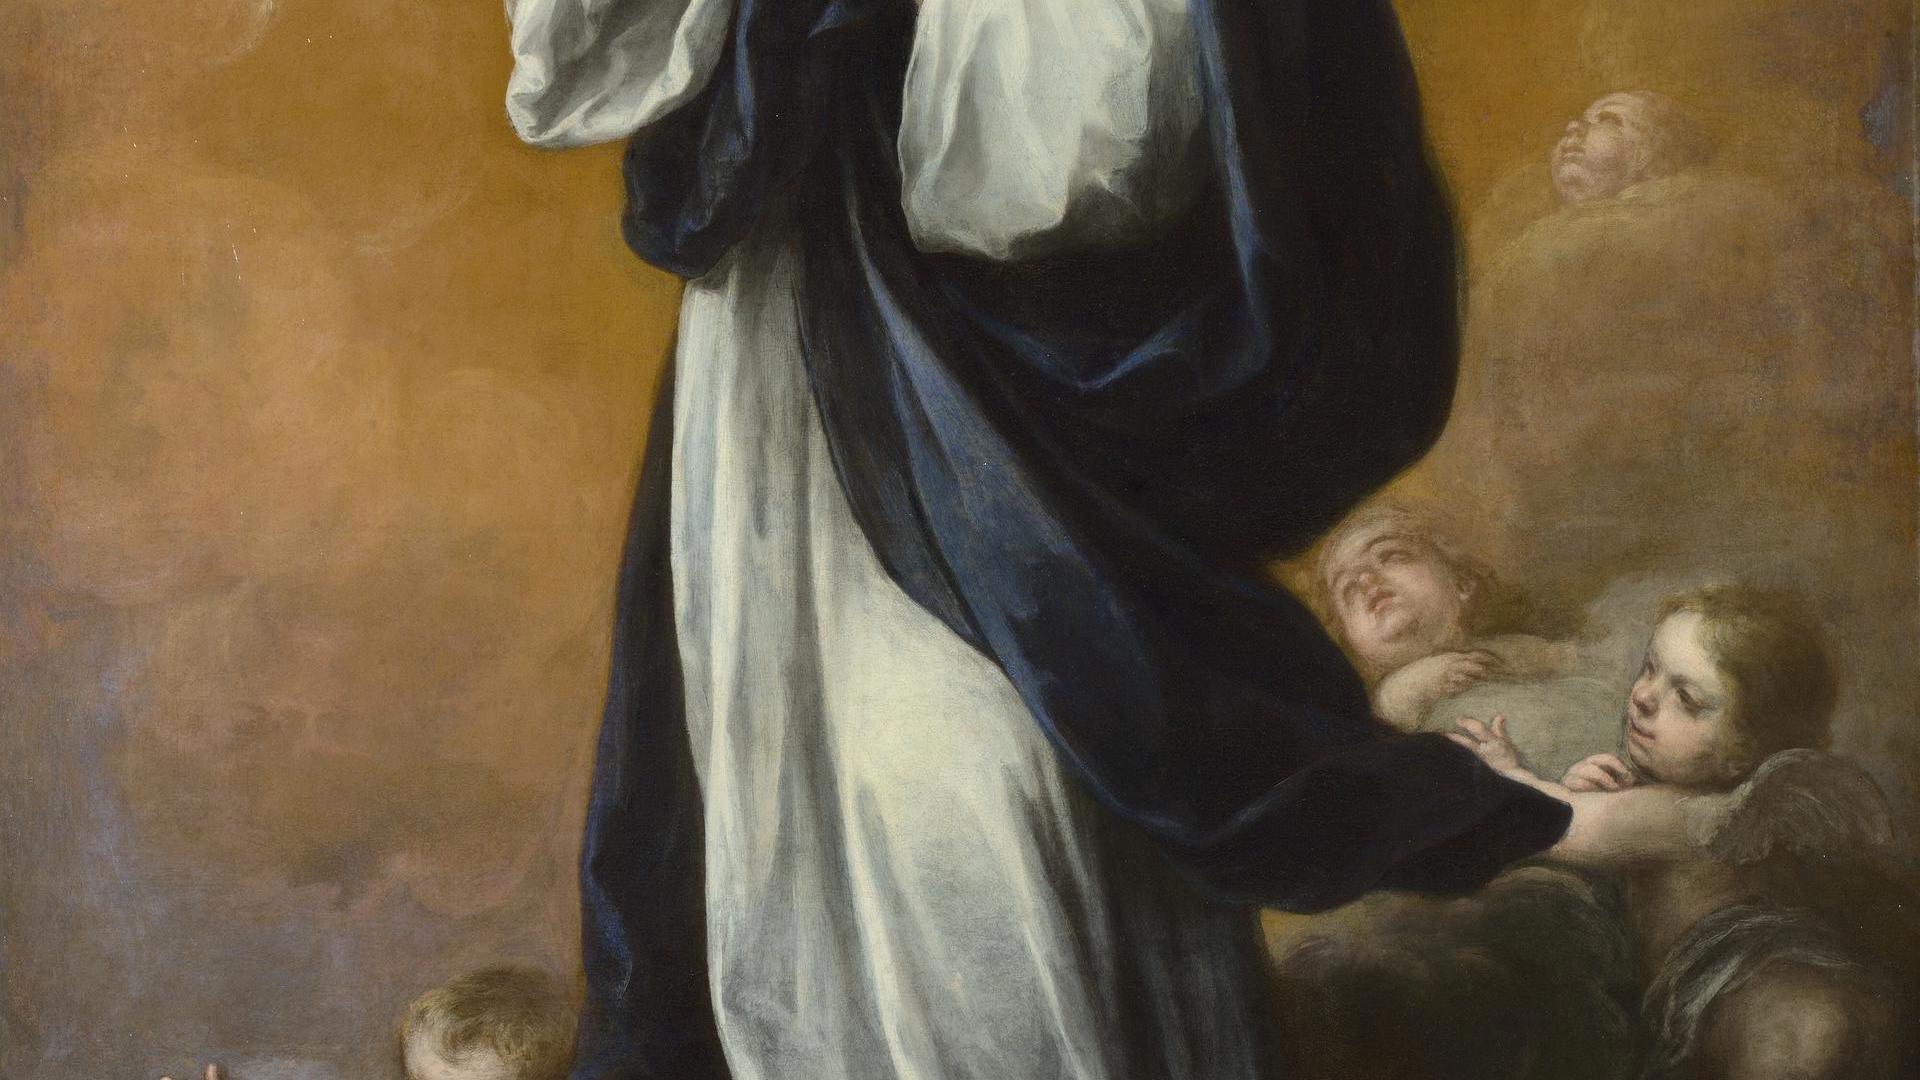 The Immaculate Conception of the Virgin by Bartolomé Esteban Murillo and studio